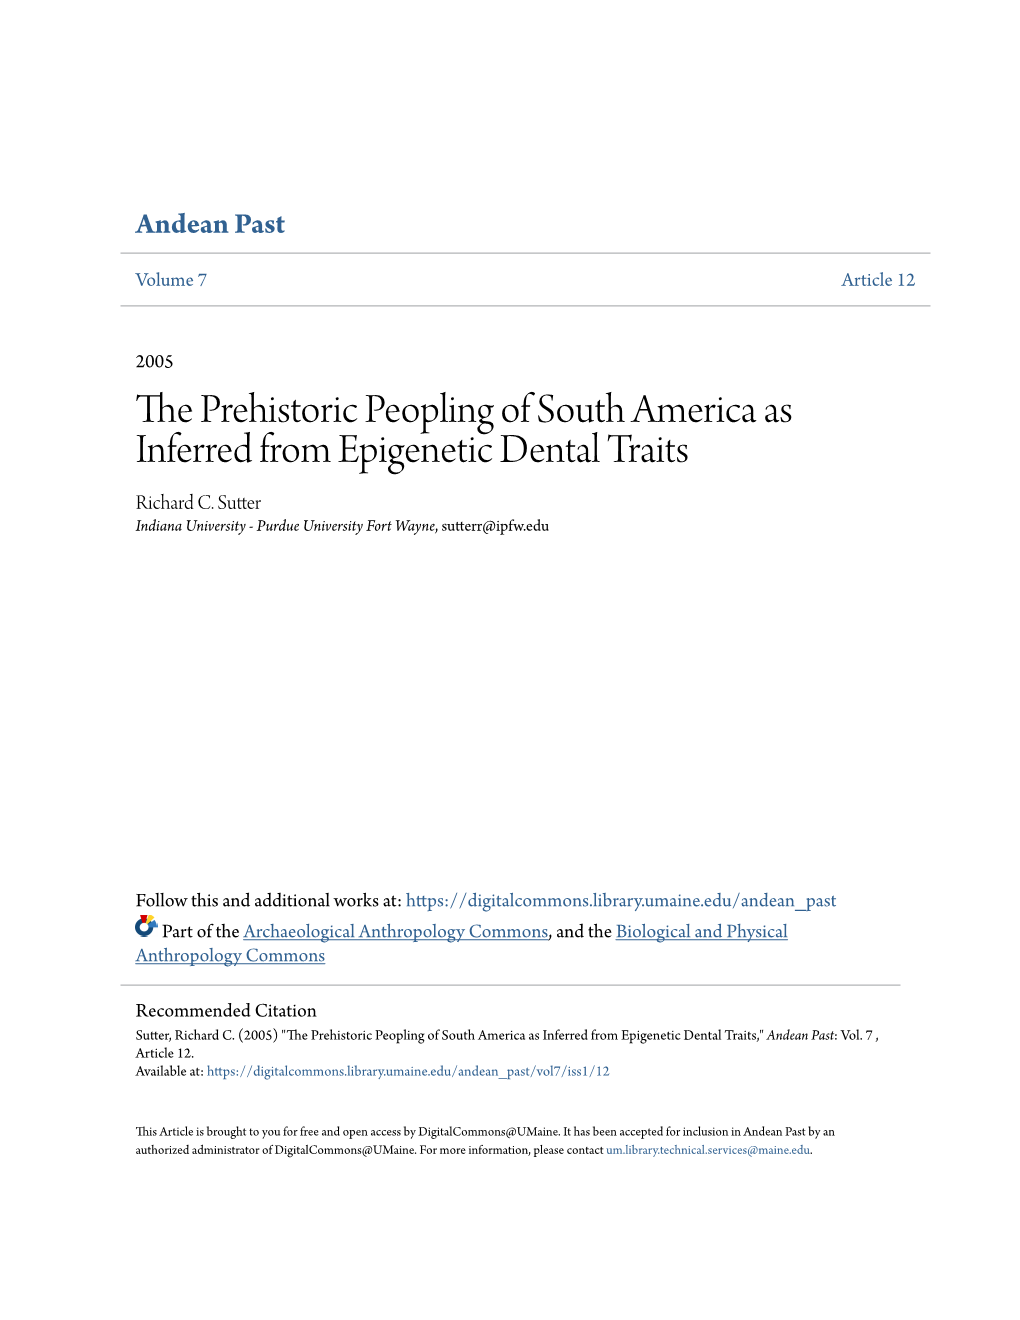 The Prehistoric Peopling of South America As Inferred from Epigenetic Dental Traits